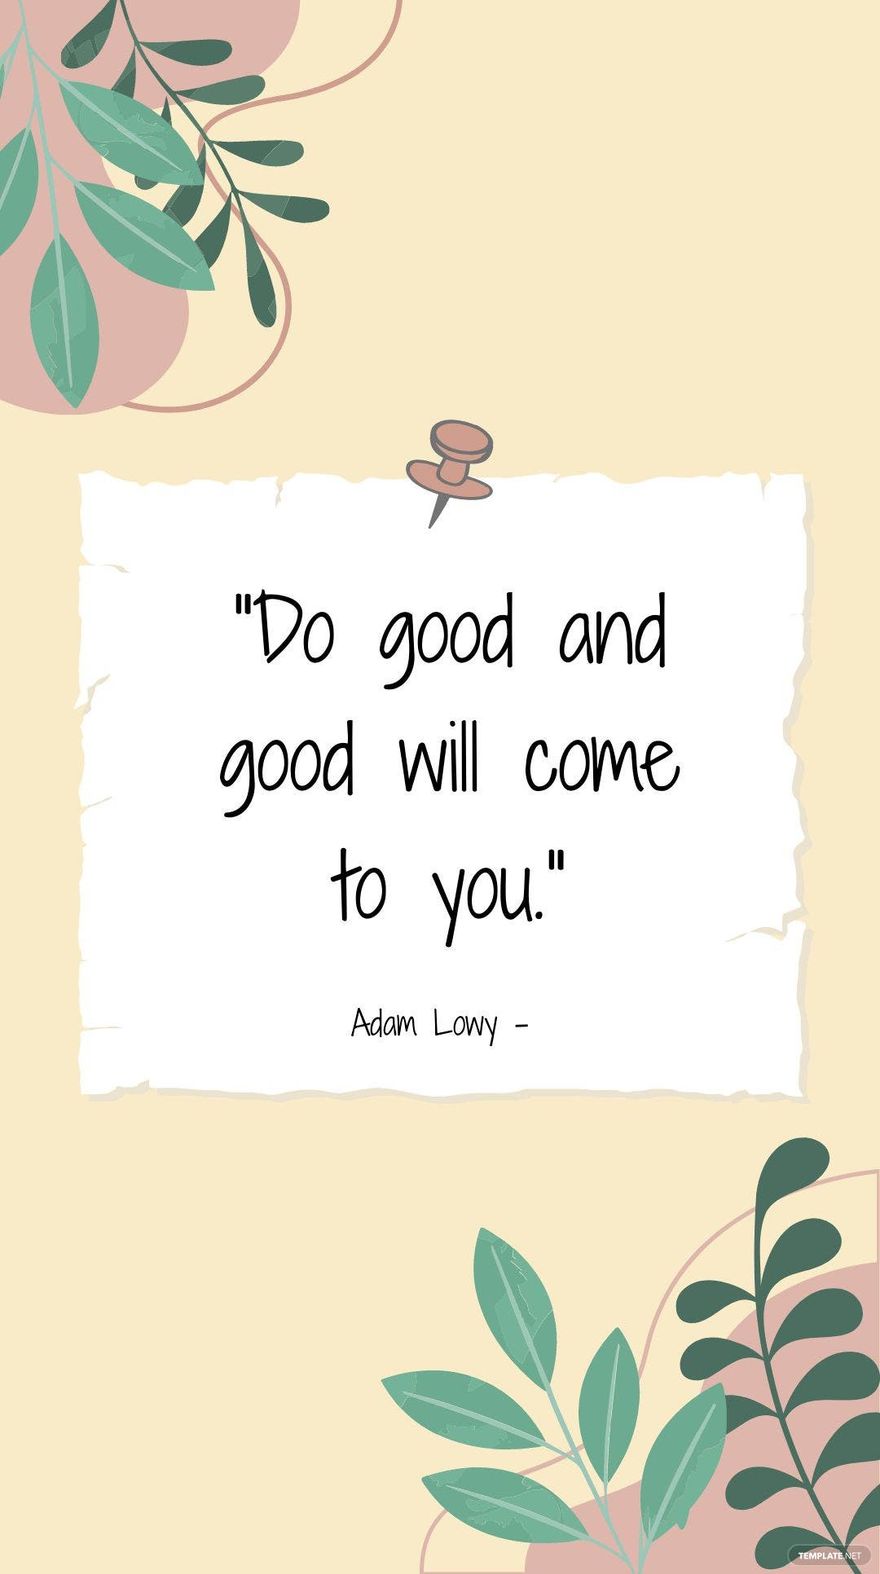 Adam Lowy - Do good and good will come to you.